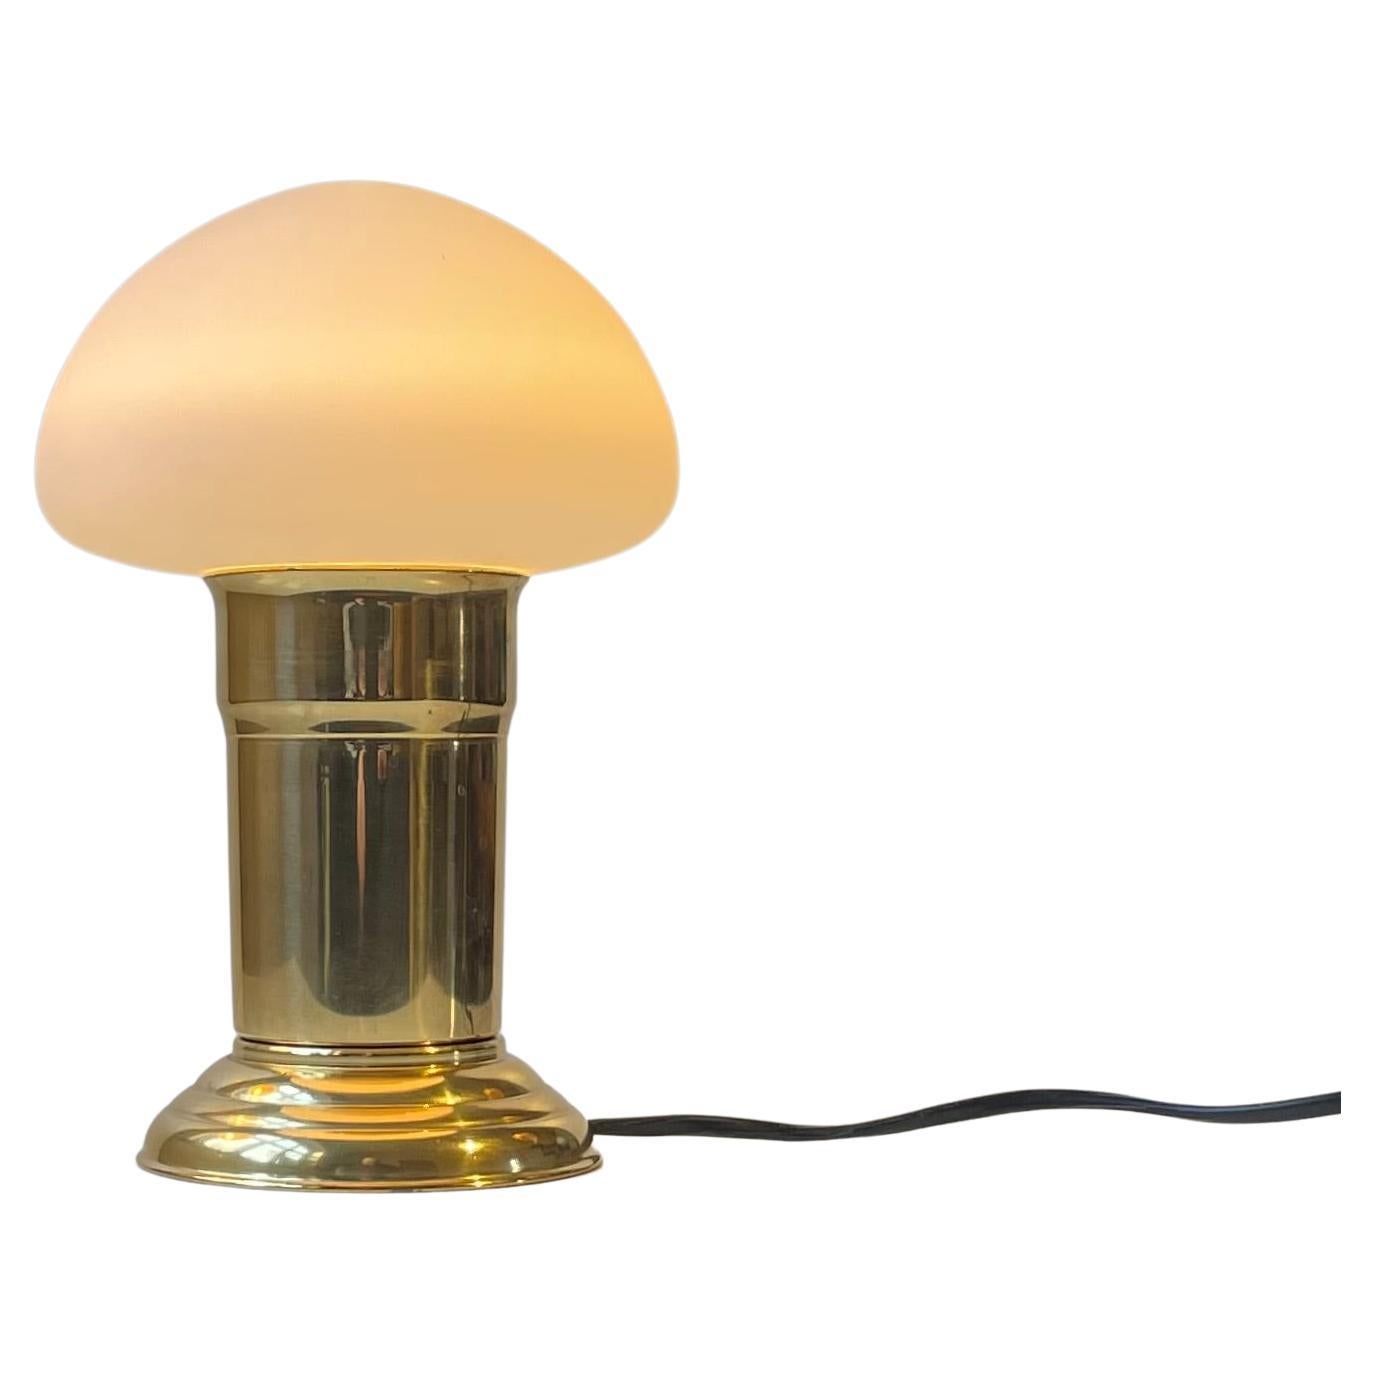 Scandinavian Mushroom Table Lamp in Brass and White Glass, 1970s For Sale